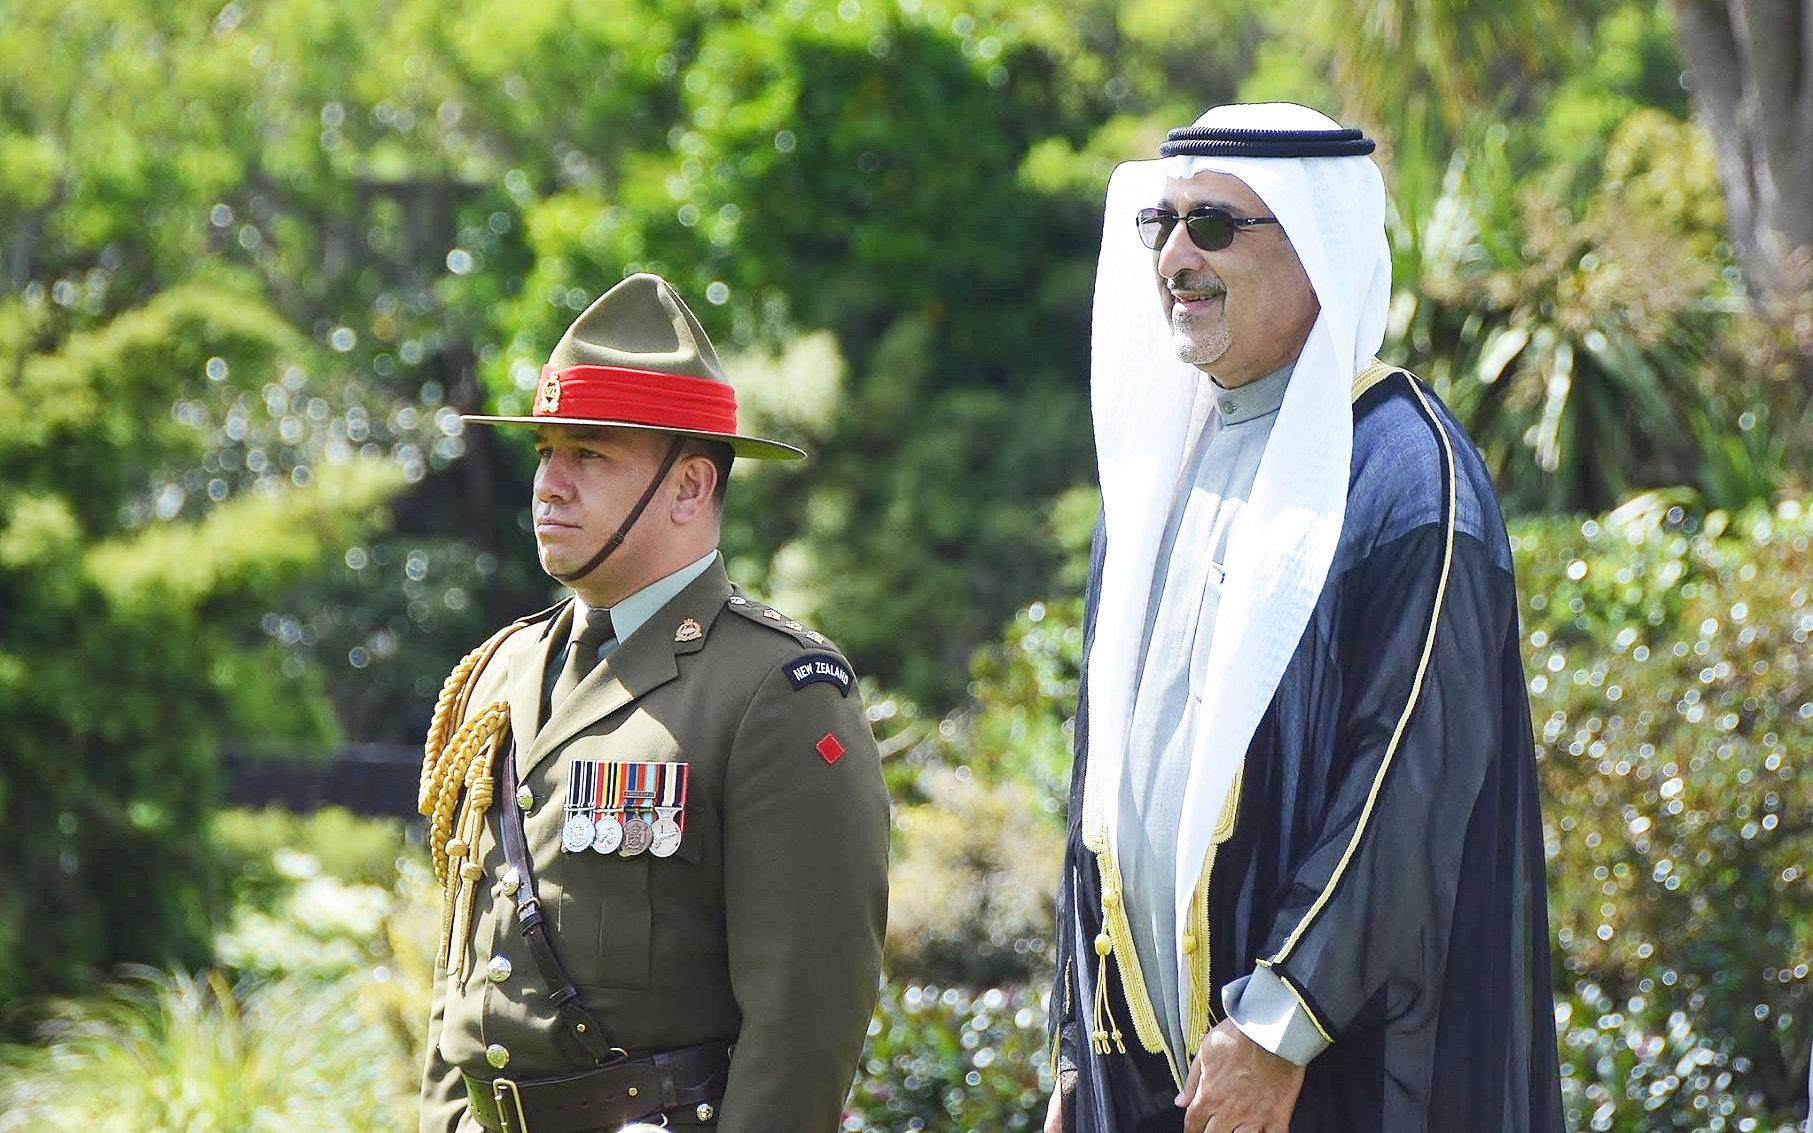 Ahmad Salem Al-Wuhaib presented his credentials to the Governor-General of New Zealand Patsy Reddy as Kuwait's new Ambassador to the southwest Pacific Ocean country,